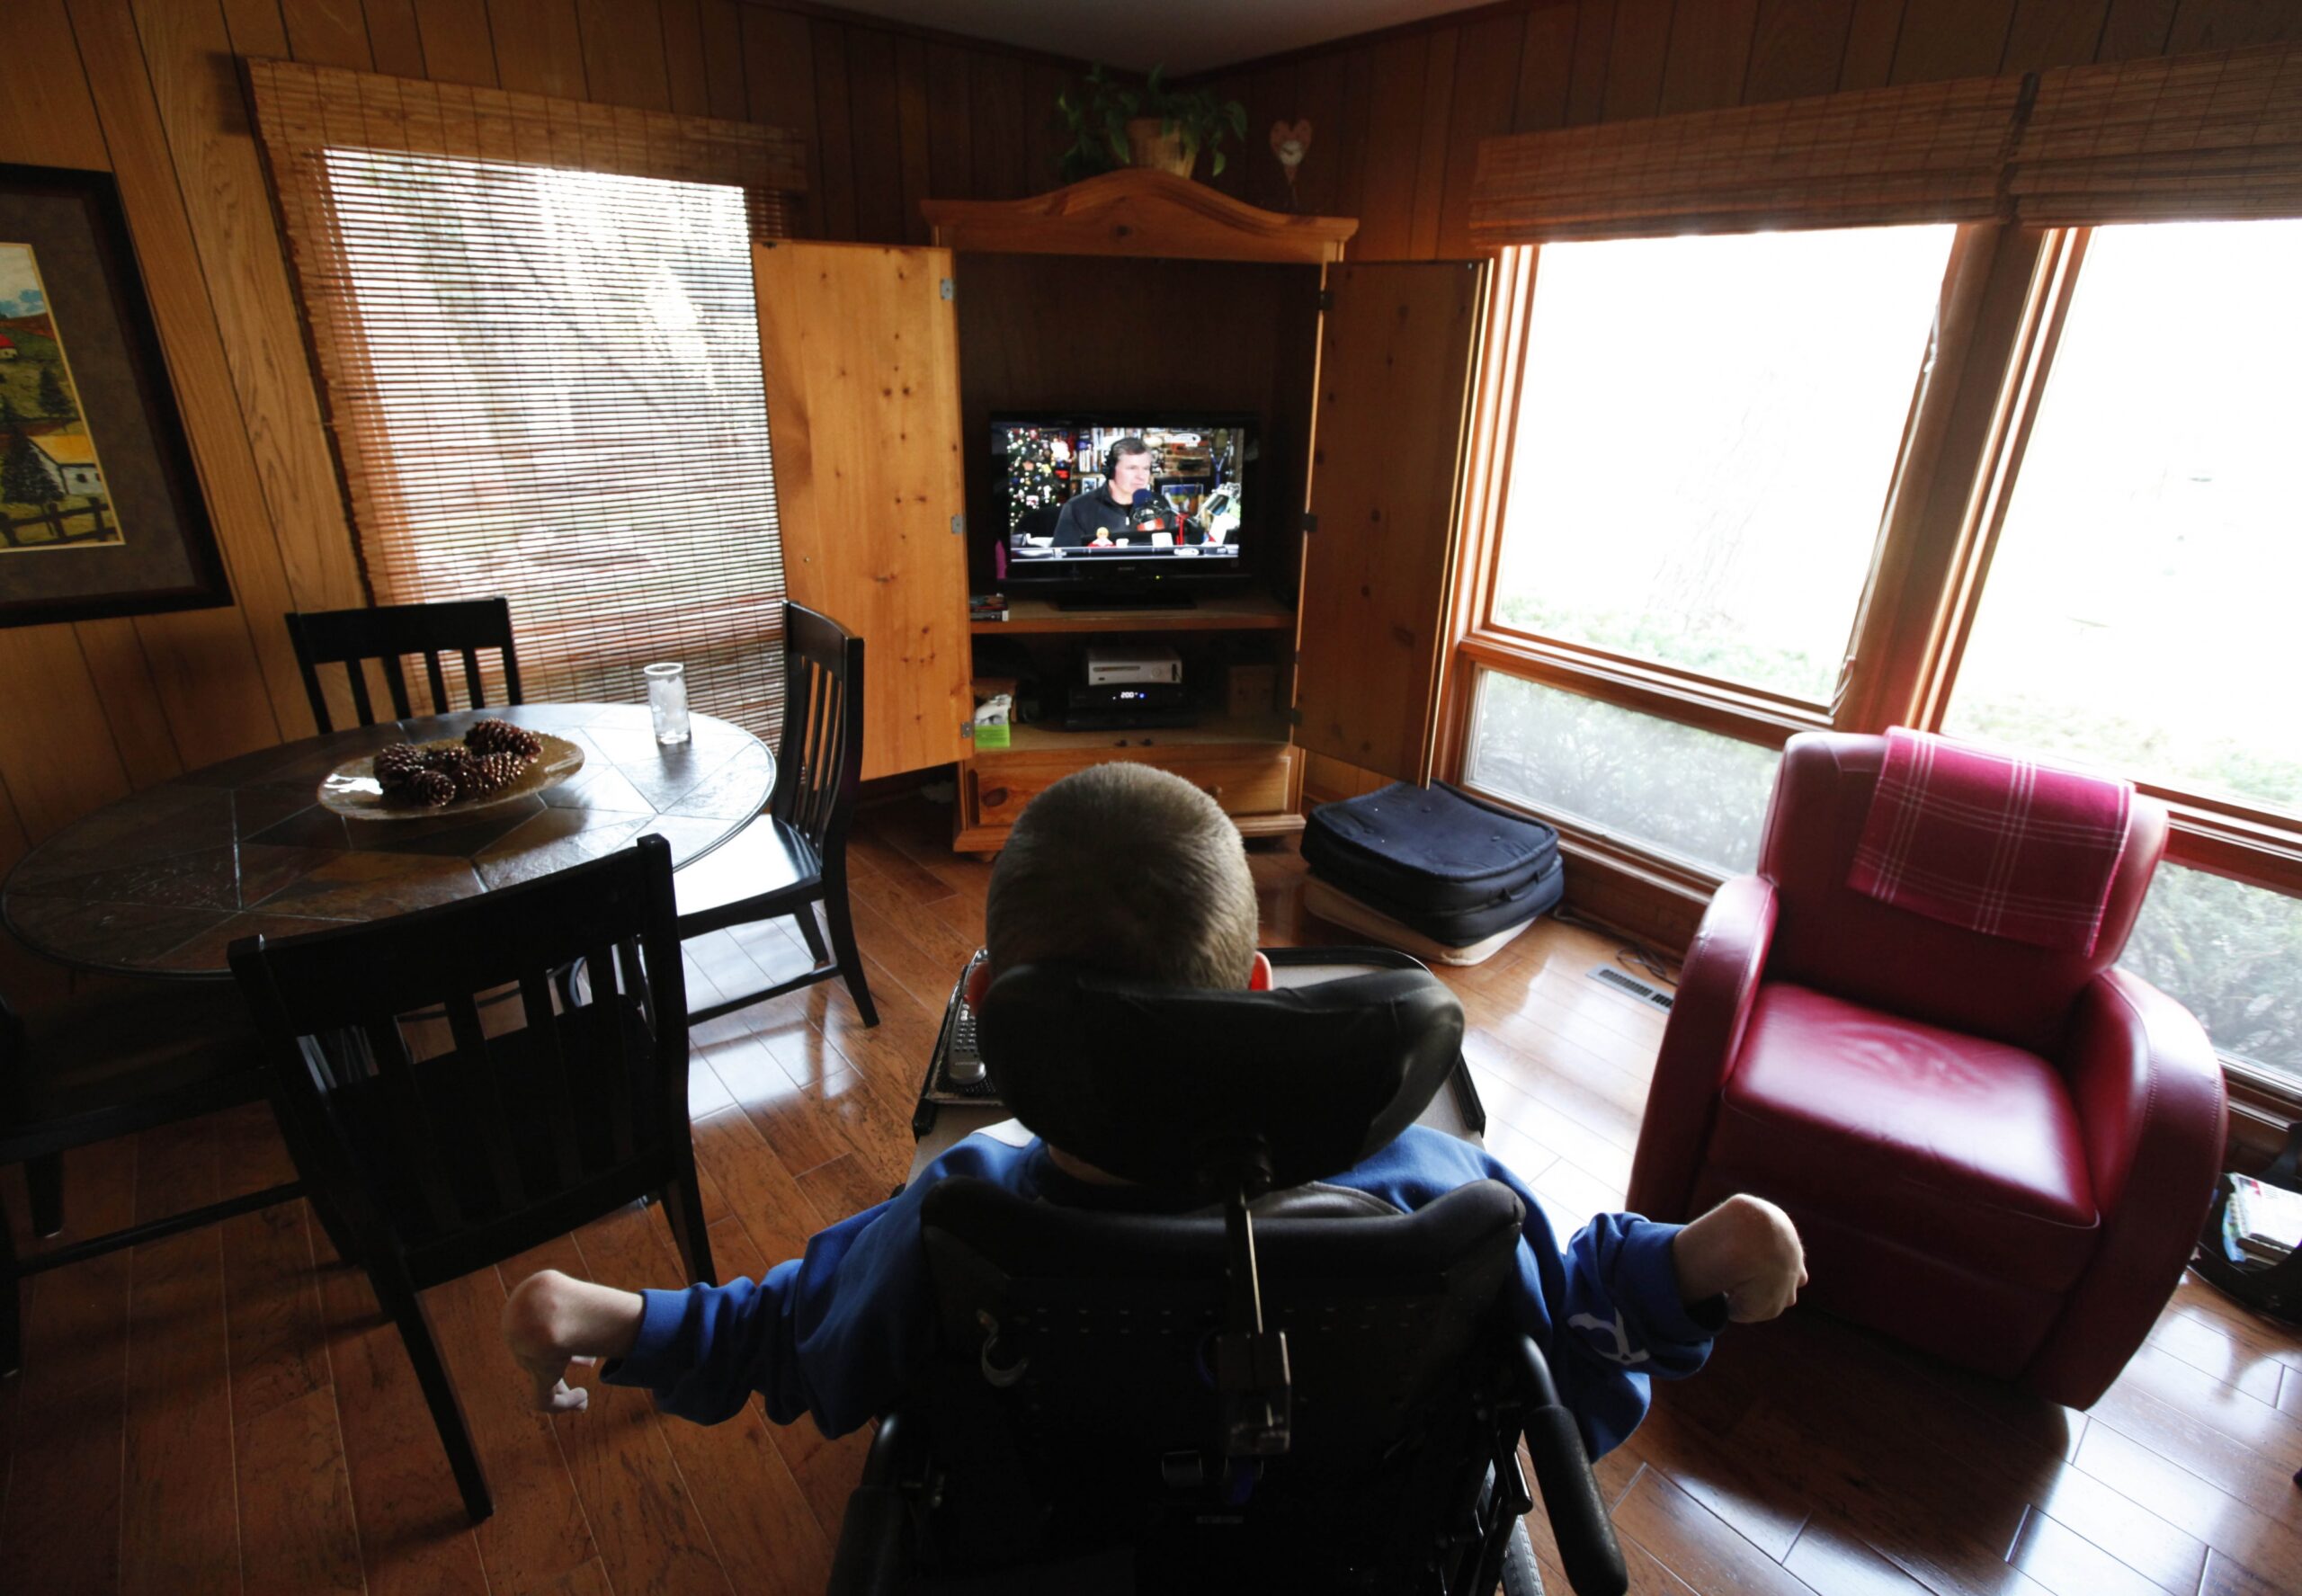 Mike Berkson, a 22-year old with cerebral palsy, watches tv